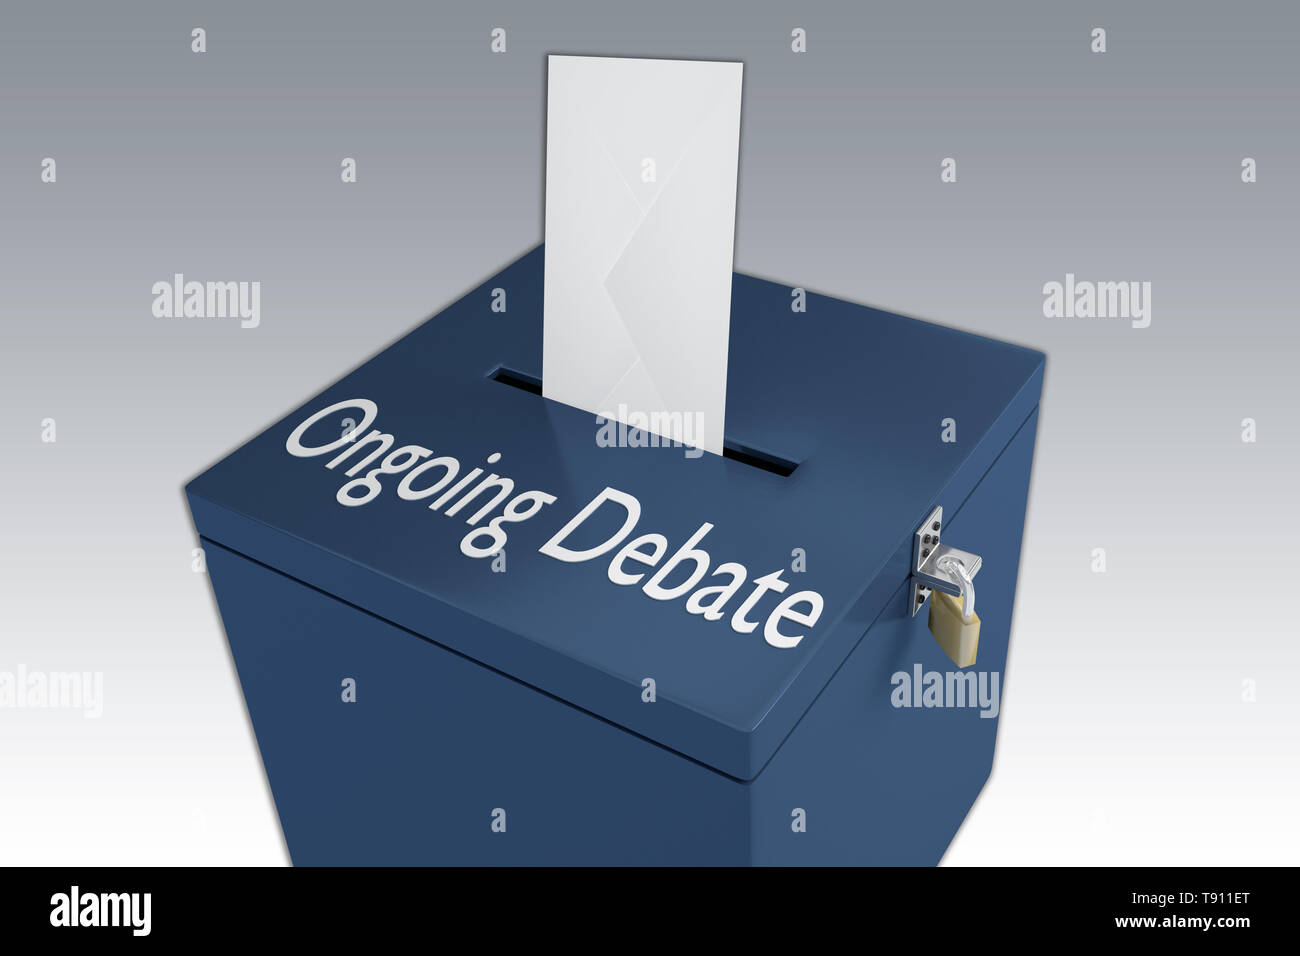 3D illustration of ONGOING DEBATE script on a ballot box, and an voting envelope been inserted into the ballot box, isolated over a pale blue gradient Stock Photo